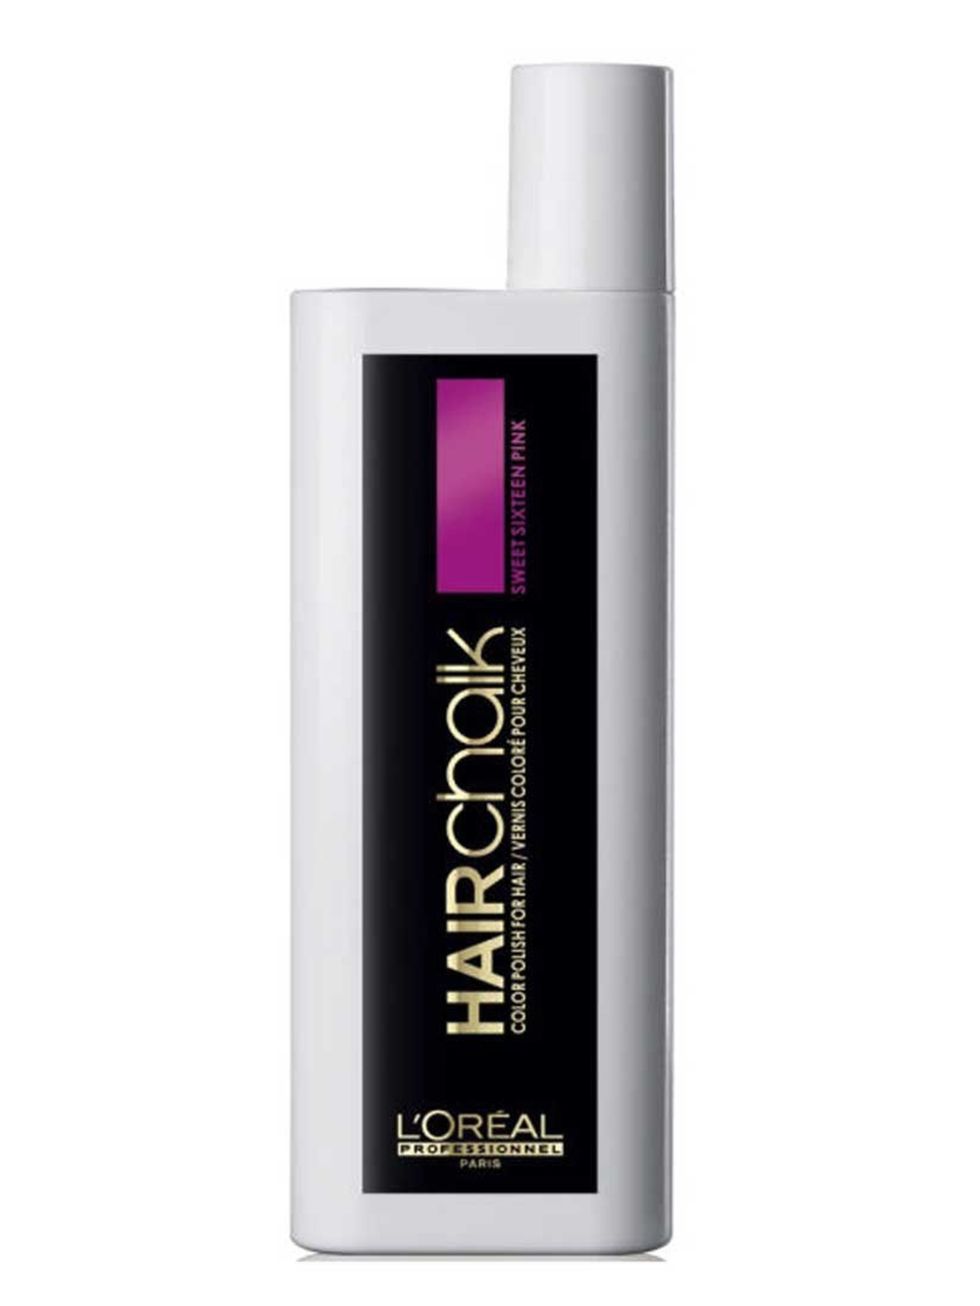 <p><a href="http://www.lookfantastic.com/l-oreal-professionnel-hairchalk-and-applicator-first-date-violet/10869384.html">LOreal Professionnel Hairchalk, £15</a></p><p>We're happy to report interesting coloured hair is still a big thing. We've seen pastel